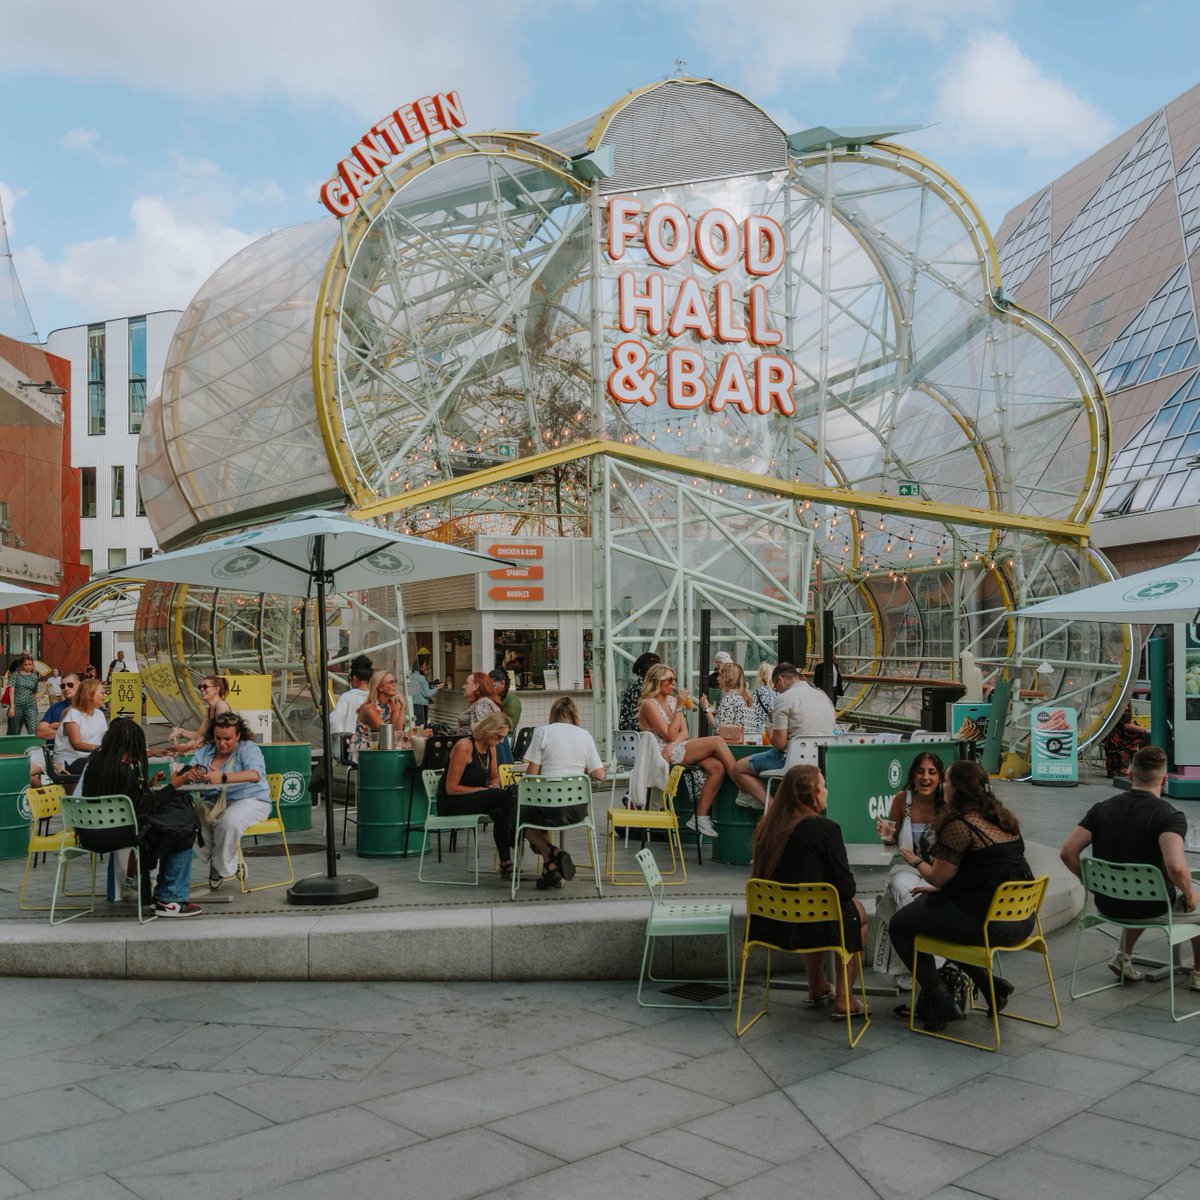 The weekend calls for a drink at @canteenfoodhall. With good vibes, cold beer, and classic cocktails, there's no where else you'll want to spend your afternoon. So gather your friends and head down to Greenwich Peninsula! #GreenwichPeninsula #NorthGreenwich #LondonBars